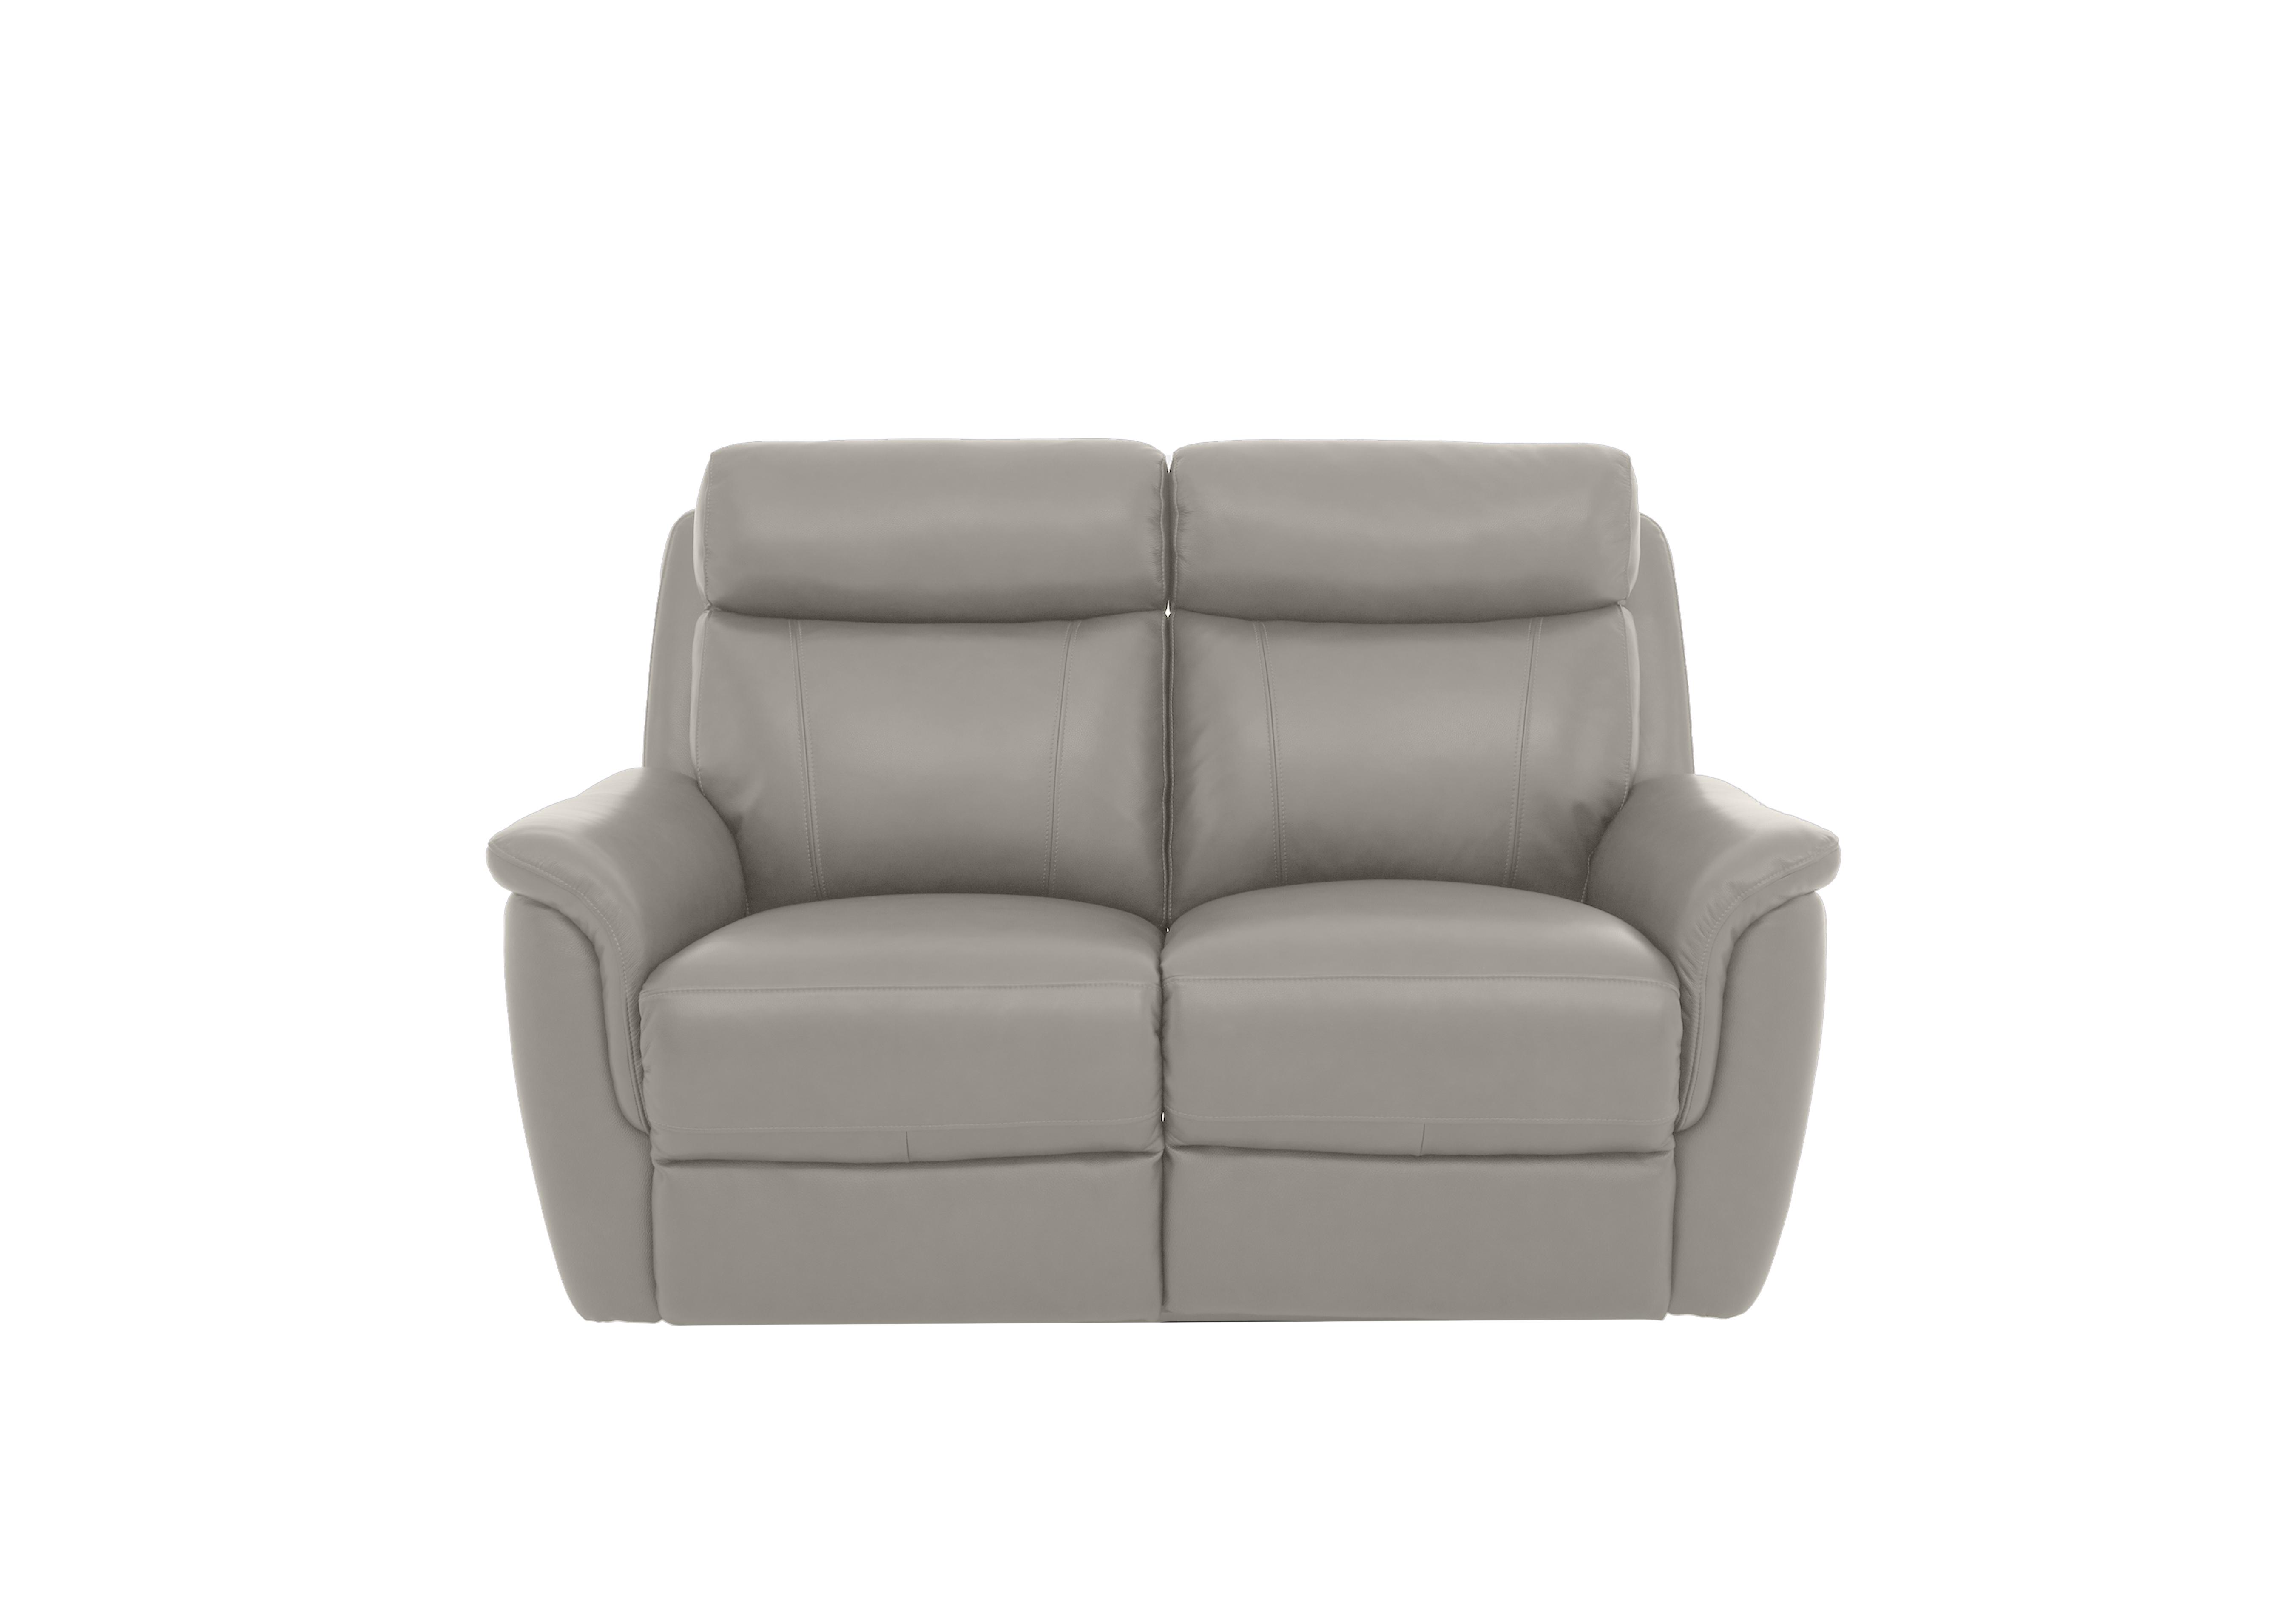 Orlando 2 Seater Leather Sofa in 60/28 New Grey on Furniture Village